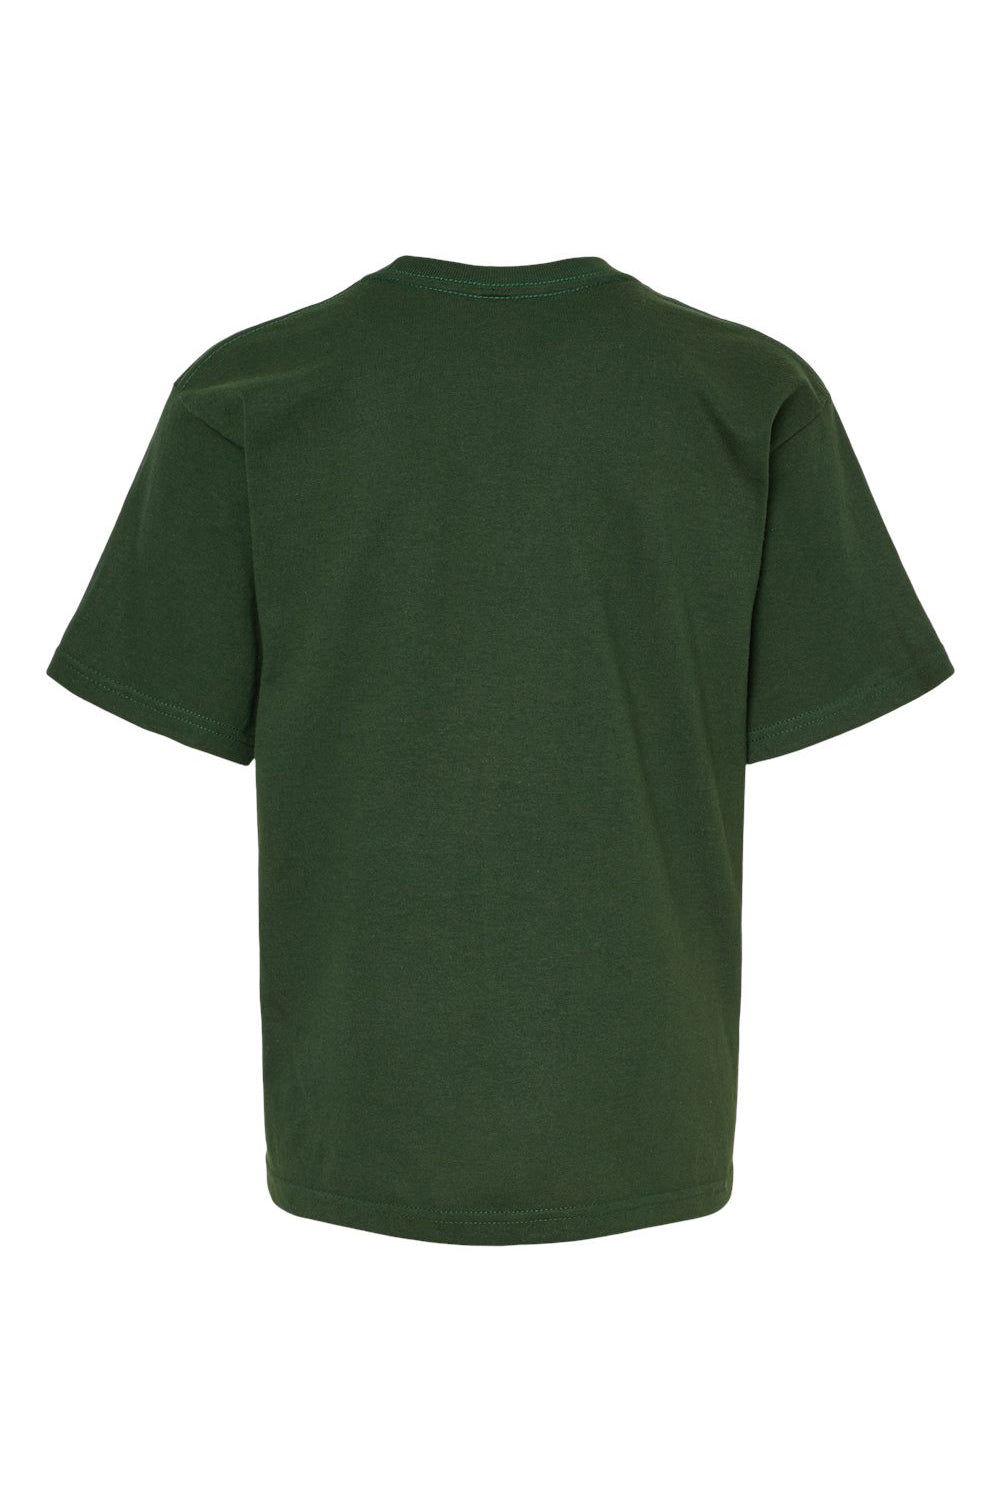 M&O 4850 Youth Gold Soft Touch Short Sleeve Crewneck T-Shirt Forest Green Flat Back